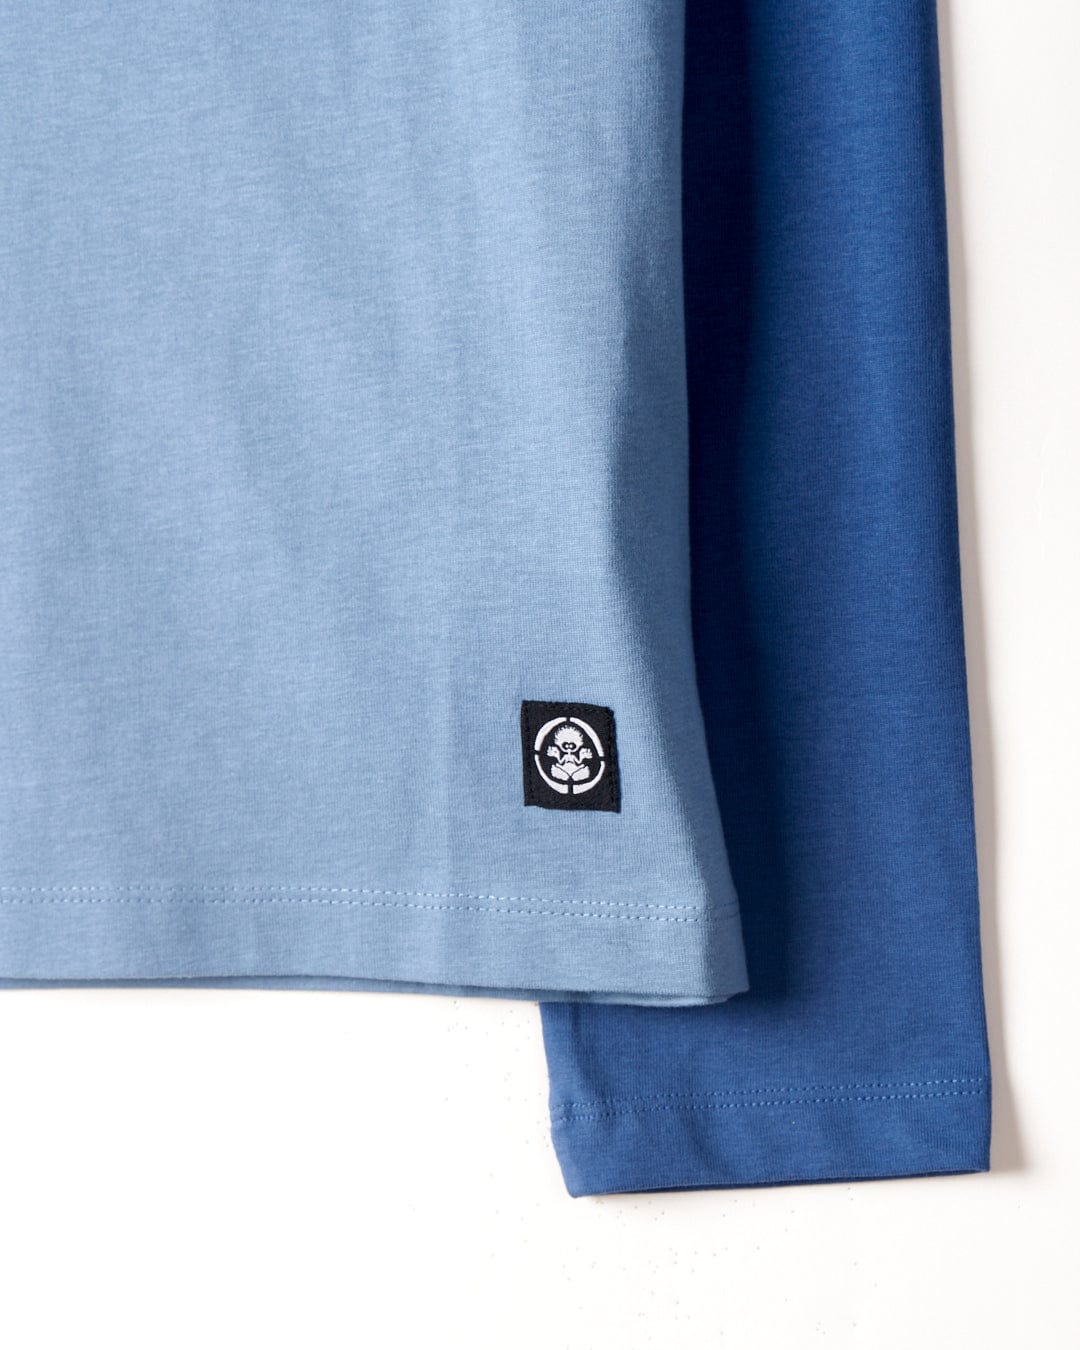 Close-up of a blue Spray Stripe - Kids Raglan Long Sleeve T-shirt with raglan contrast sleeves and a small black Saltrock branding patch on the left side.